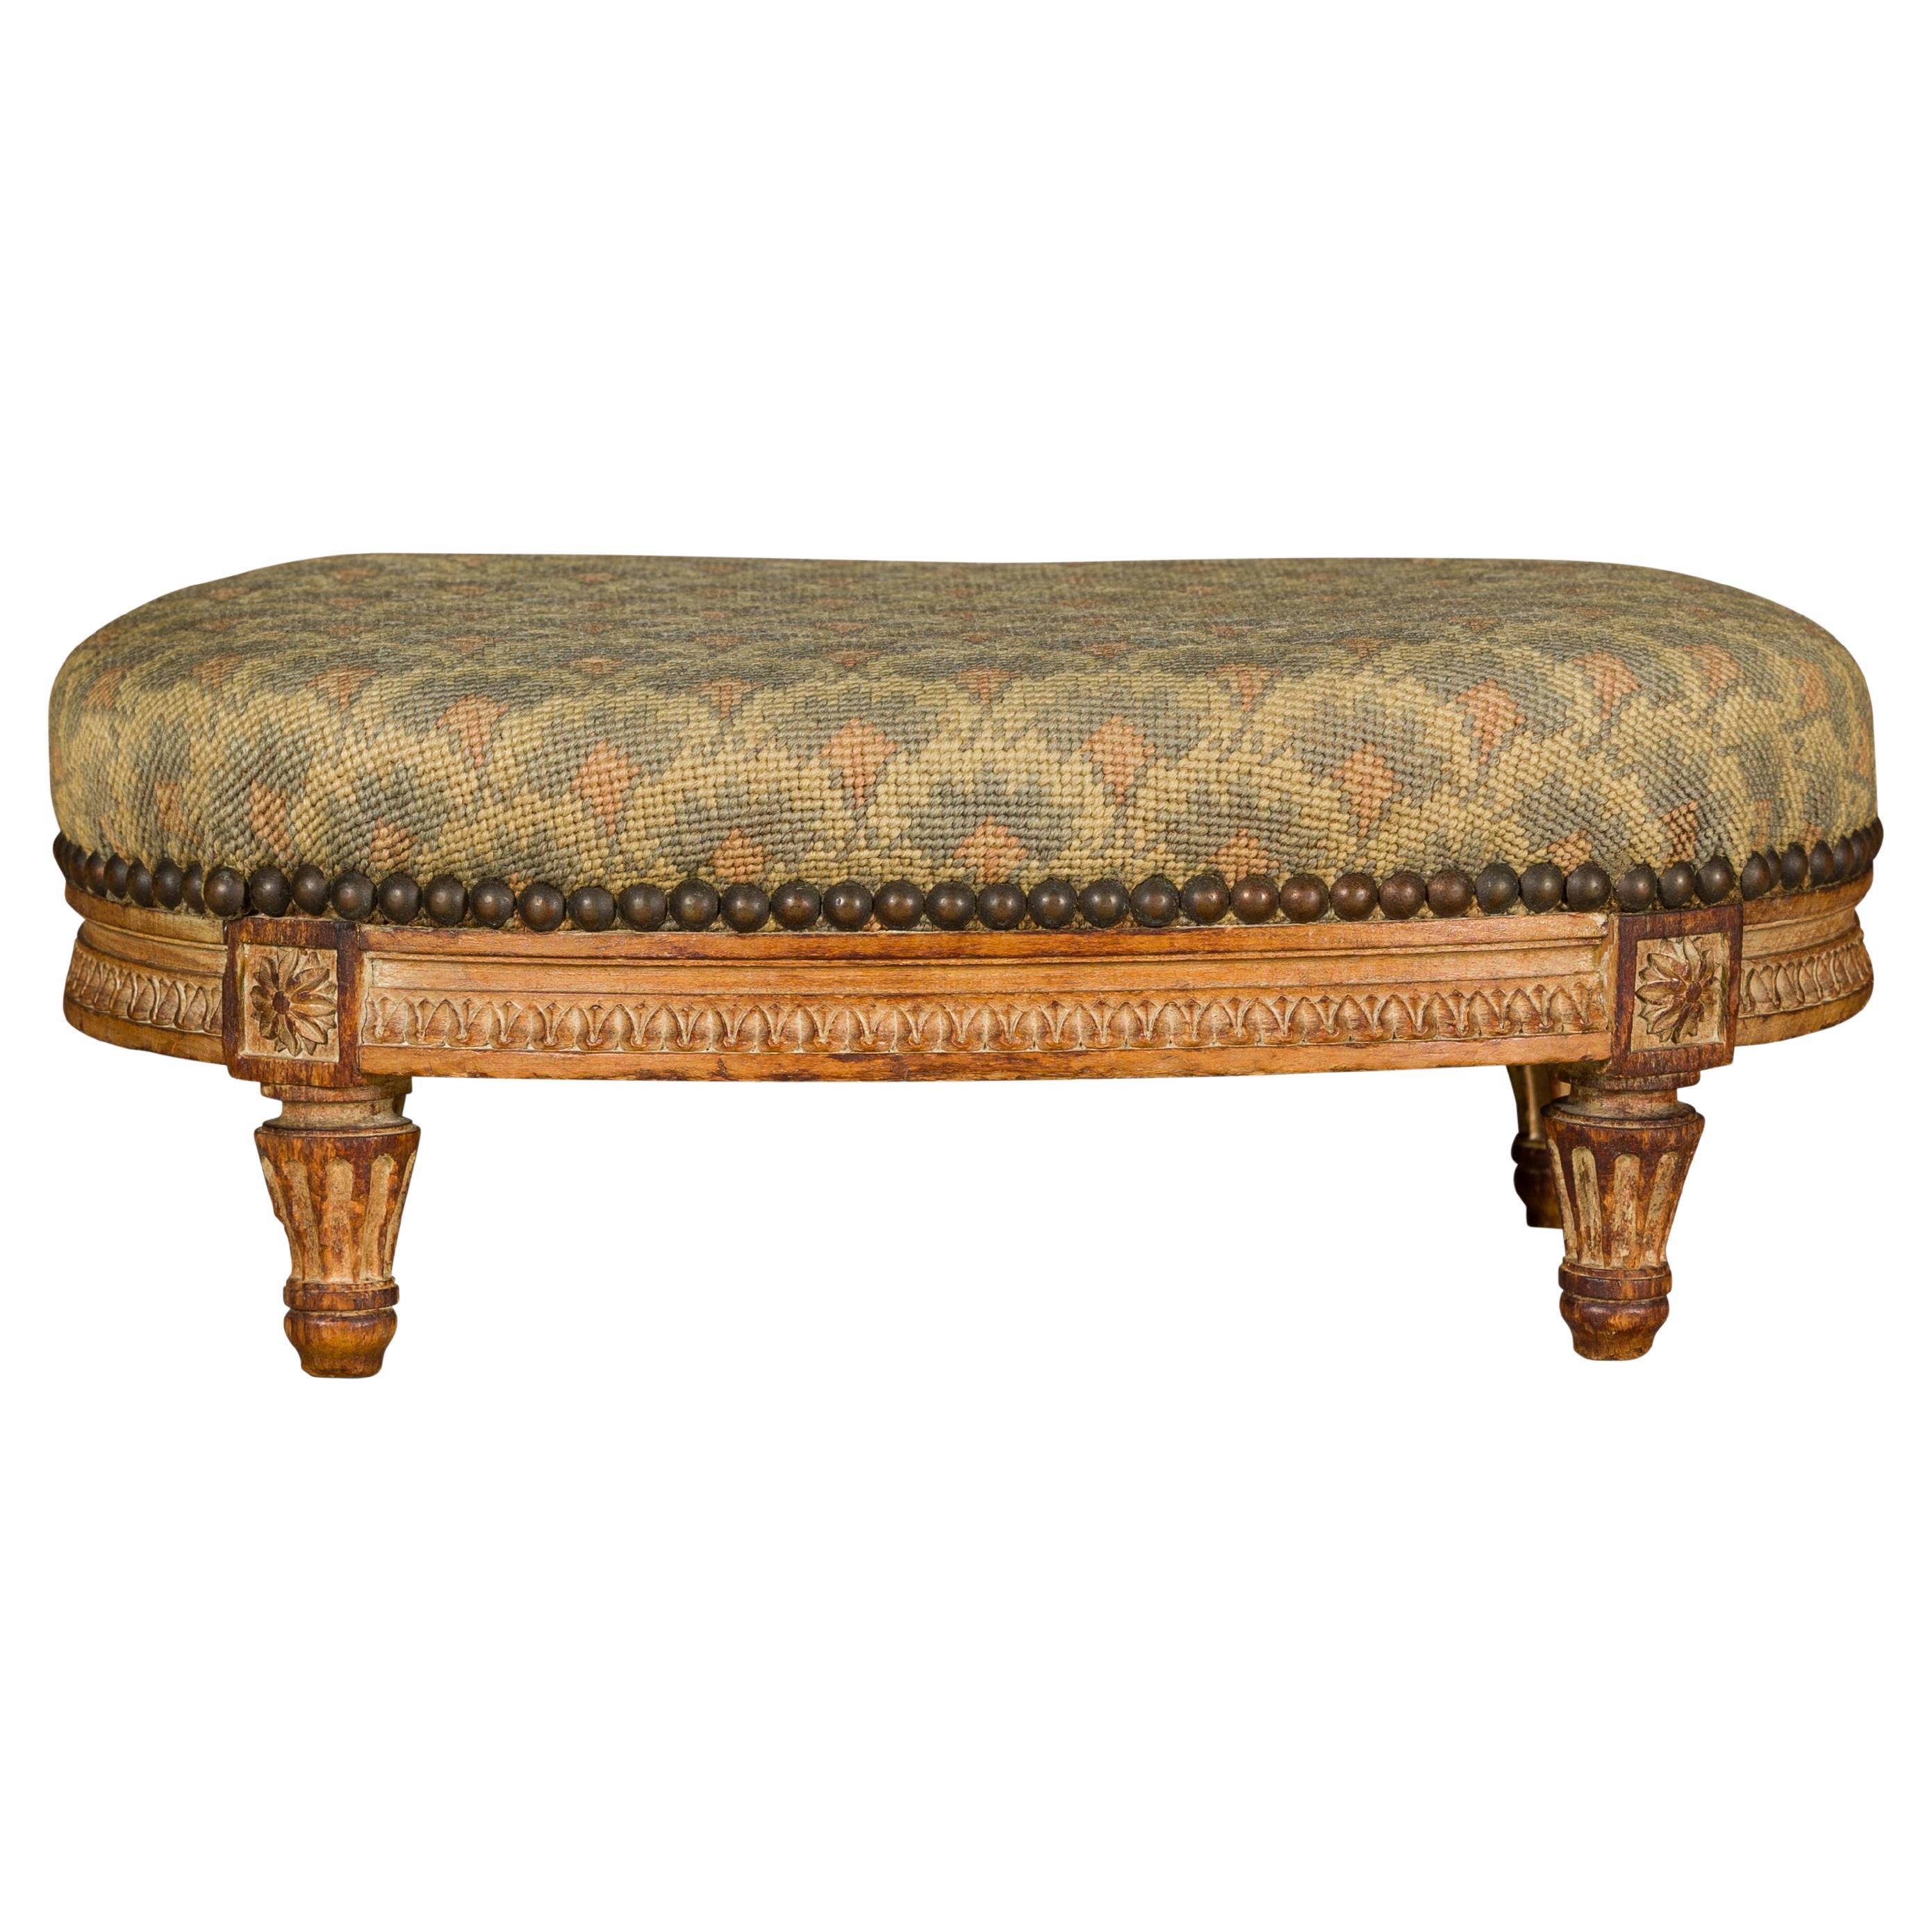 Louis XVI Style 19th Century French Stamped Pihouée Footstool with Carved Décor For Sale